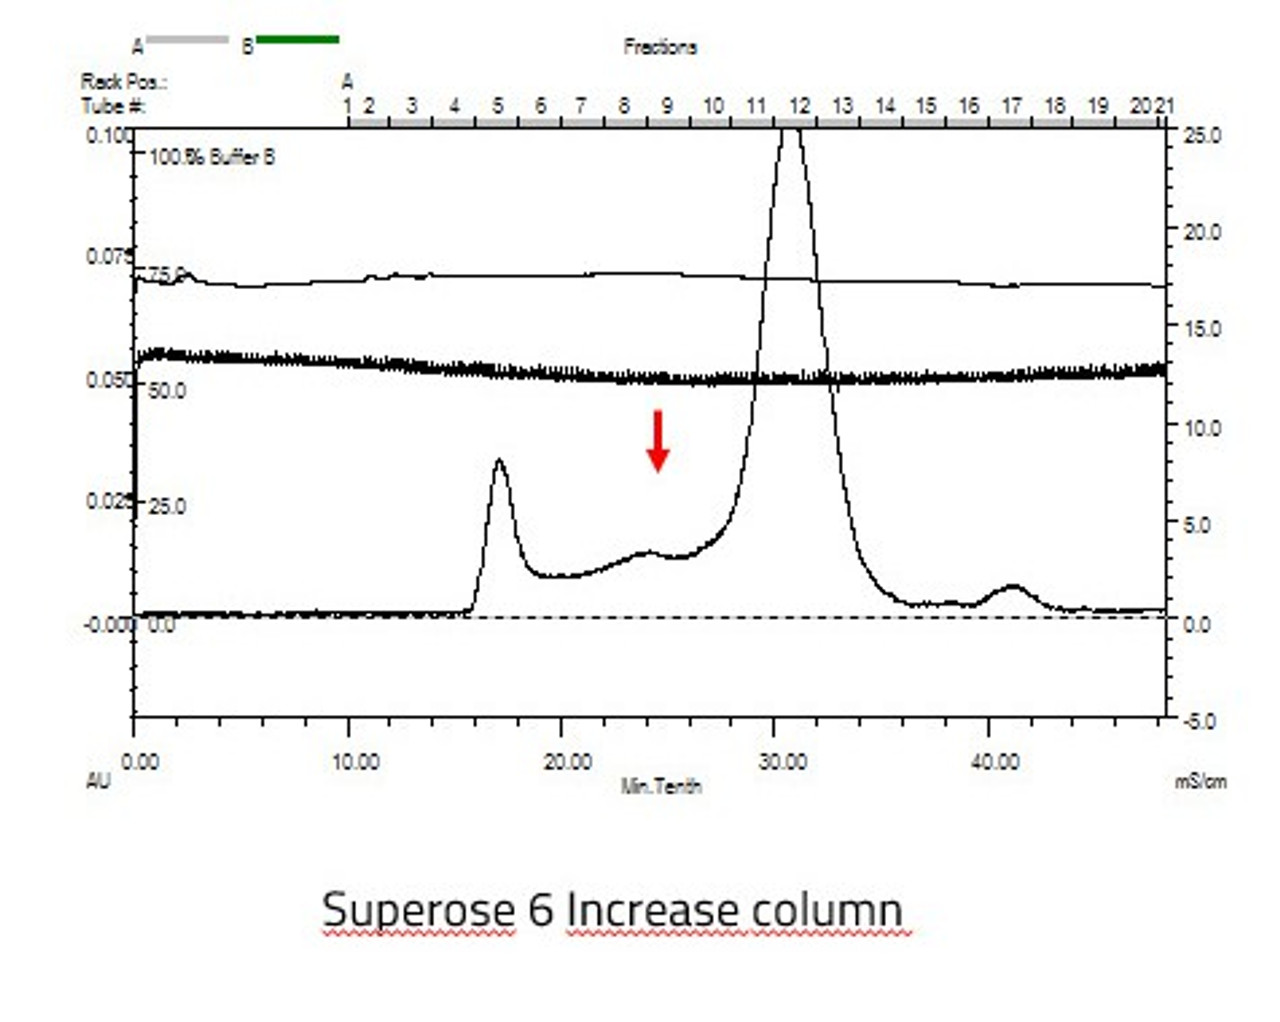 Gel filtration result of SPIKE in MSP nanodisc. The peak that represents spike is marked with a red arrow.